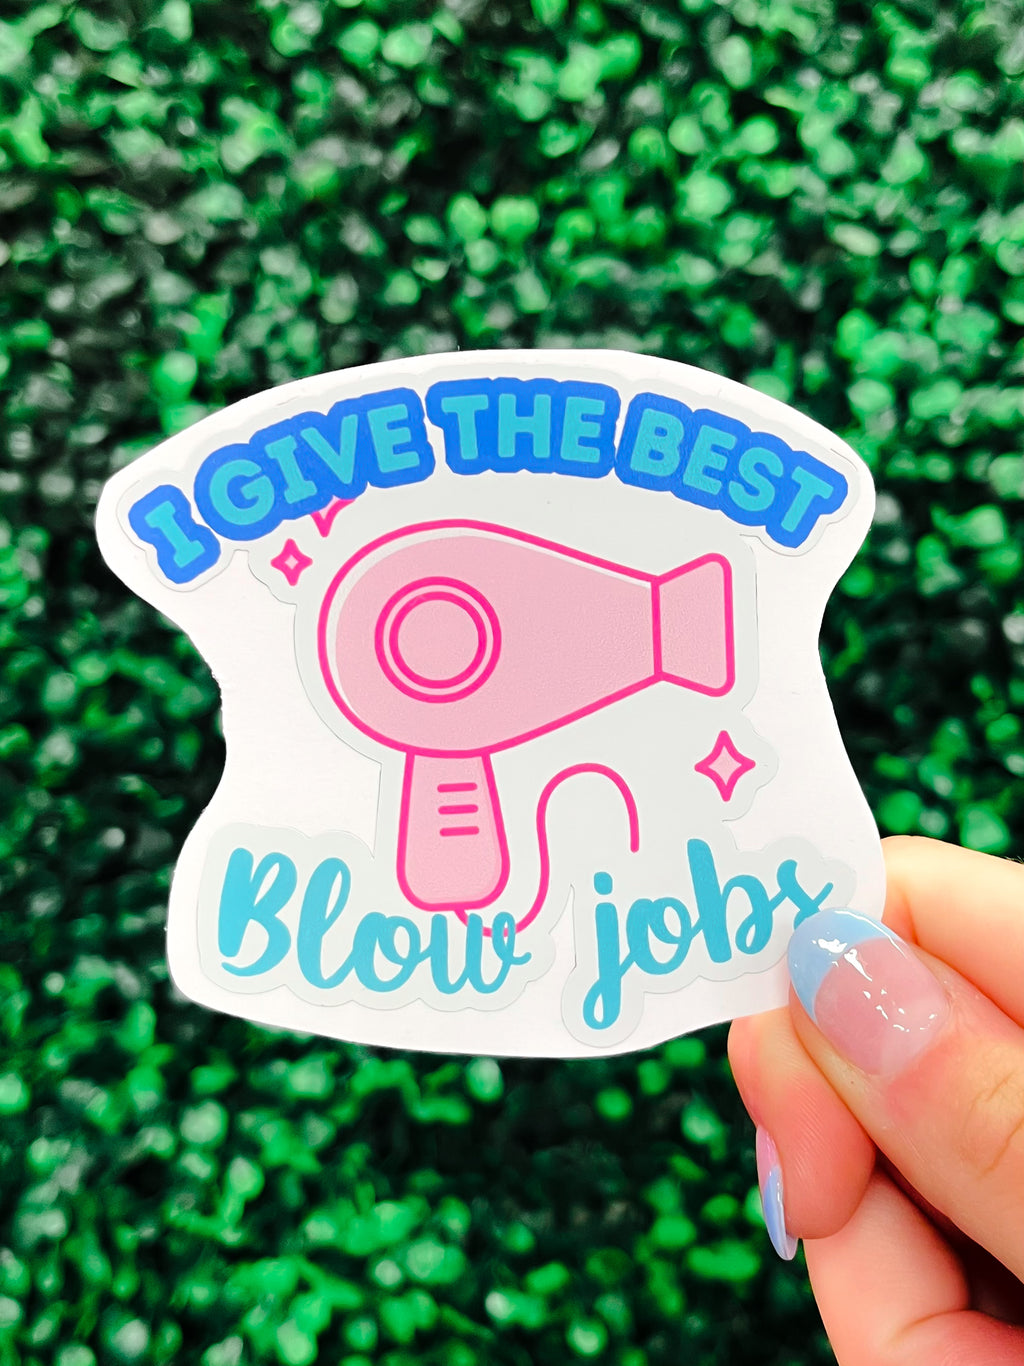 Show off your blow job skills with this satirical sticker! Decorated with a retro-style hair dryer and the declaration "I Give The Best Blow Jobs", it's the perfect gift for a friend with a sense of humor! Stick it on your laptop, water bottle, or anywhere you please - you won't find a more honest sticker!